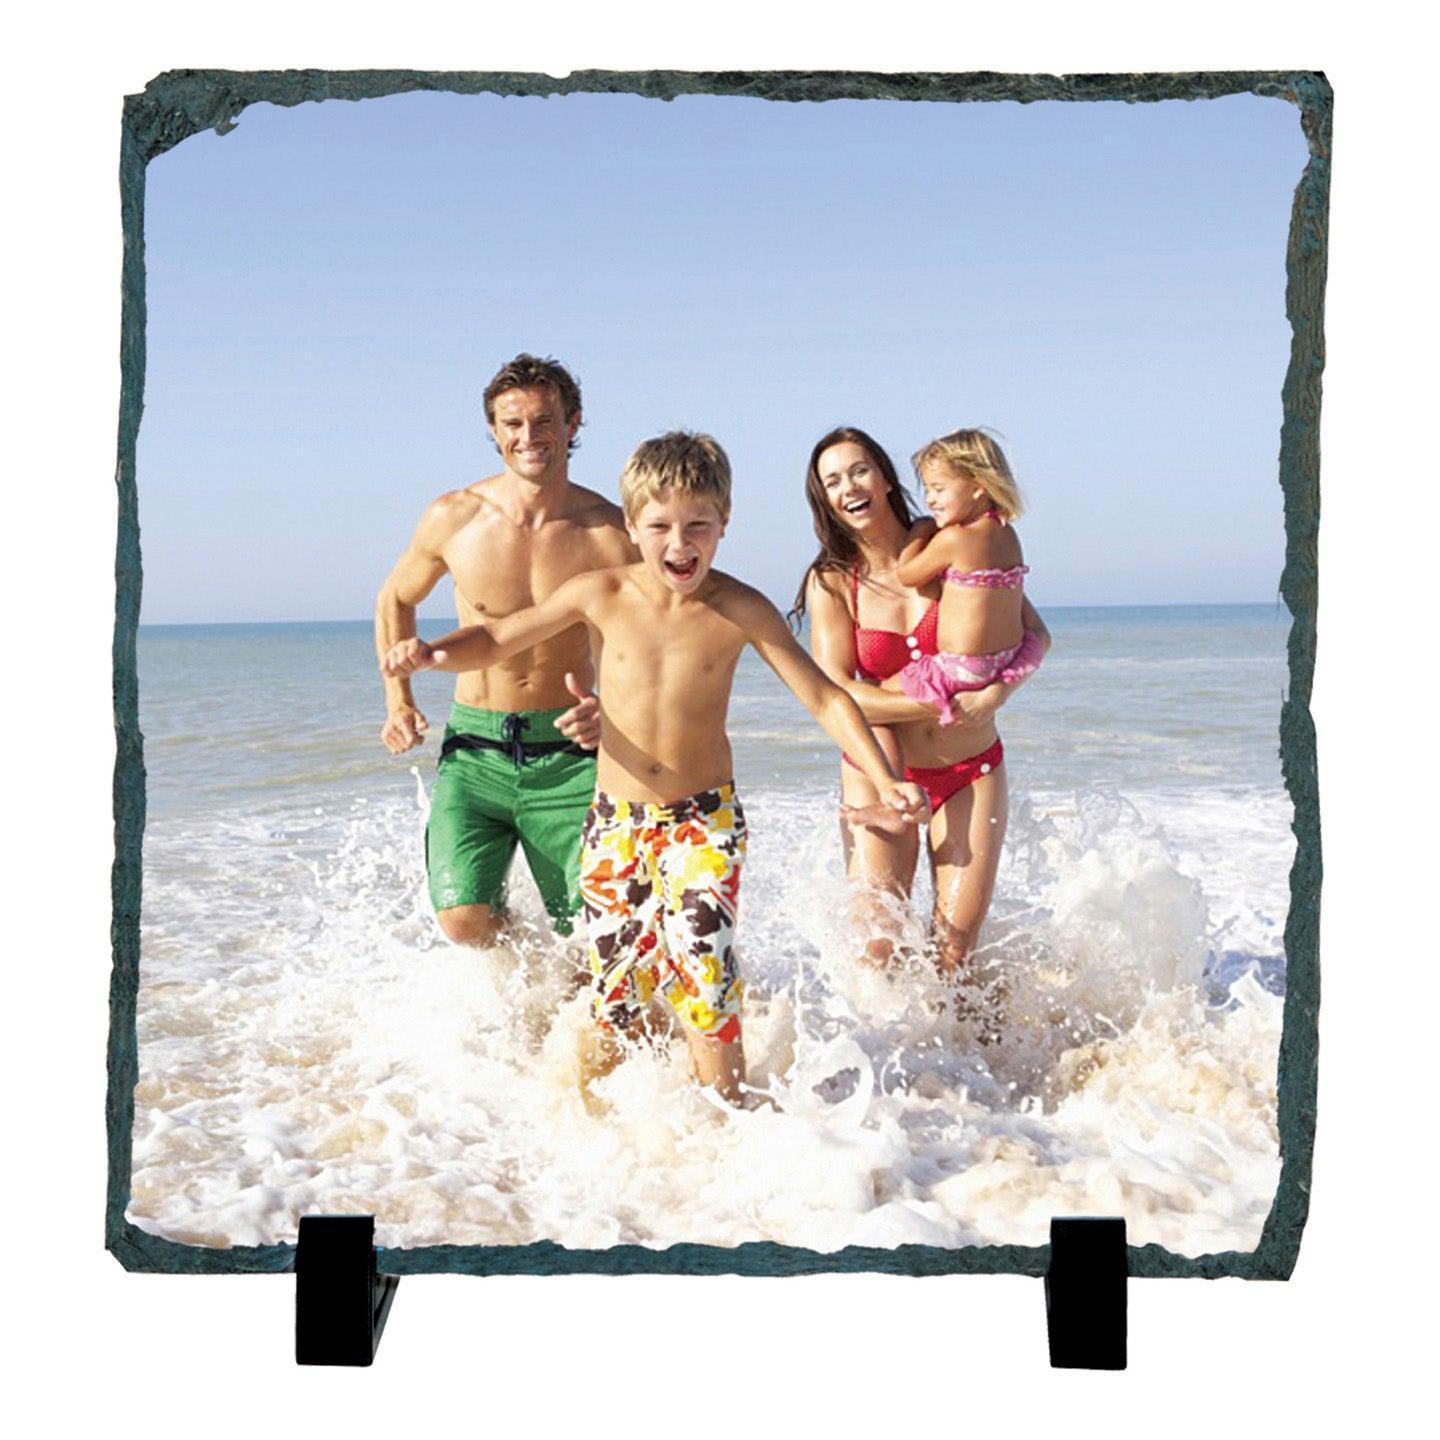 Photo slate blanks with white matte or gloss polymer coating